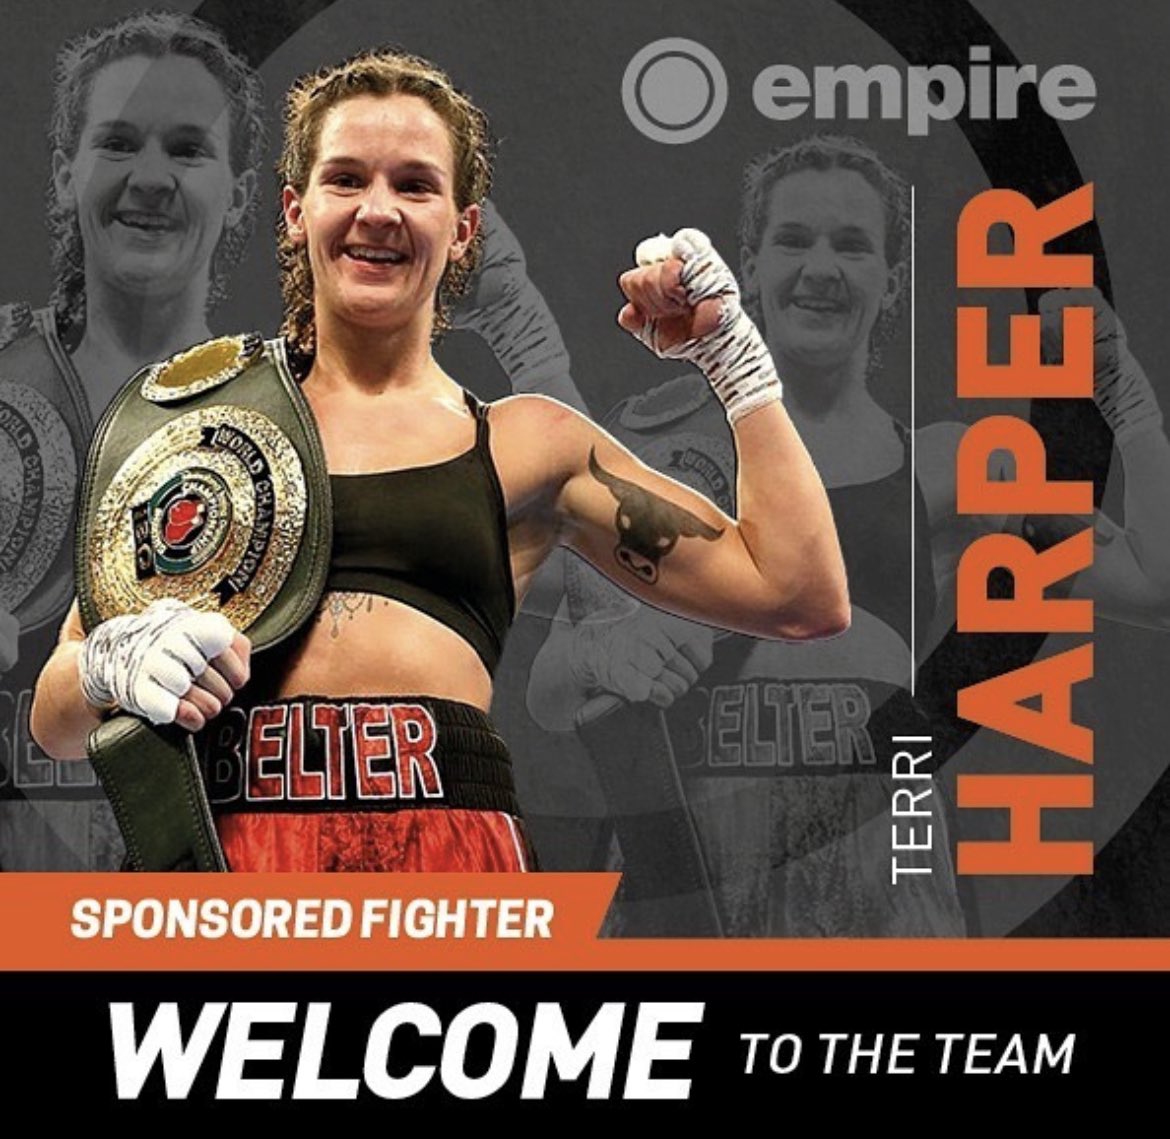 WELCOME to the @EmpireFS_ team @TerriHarper96 - what an honour to have you apart of our team 🔥 @StefyBull 

#ConquerAll